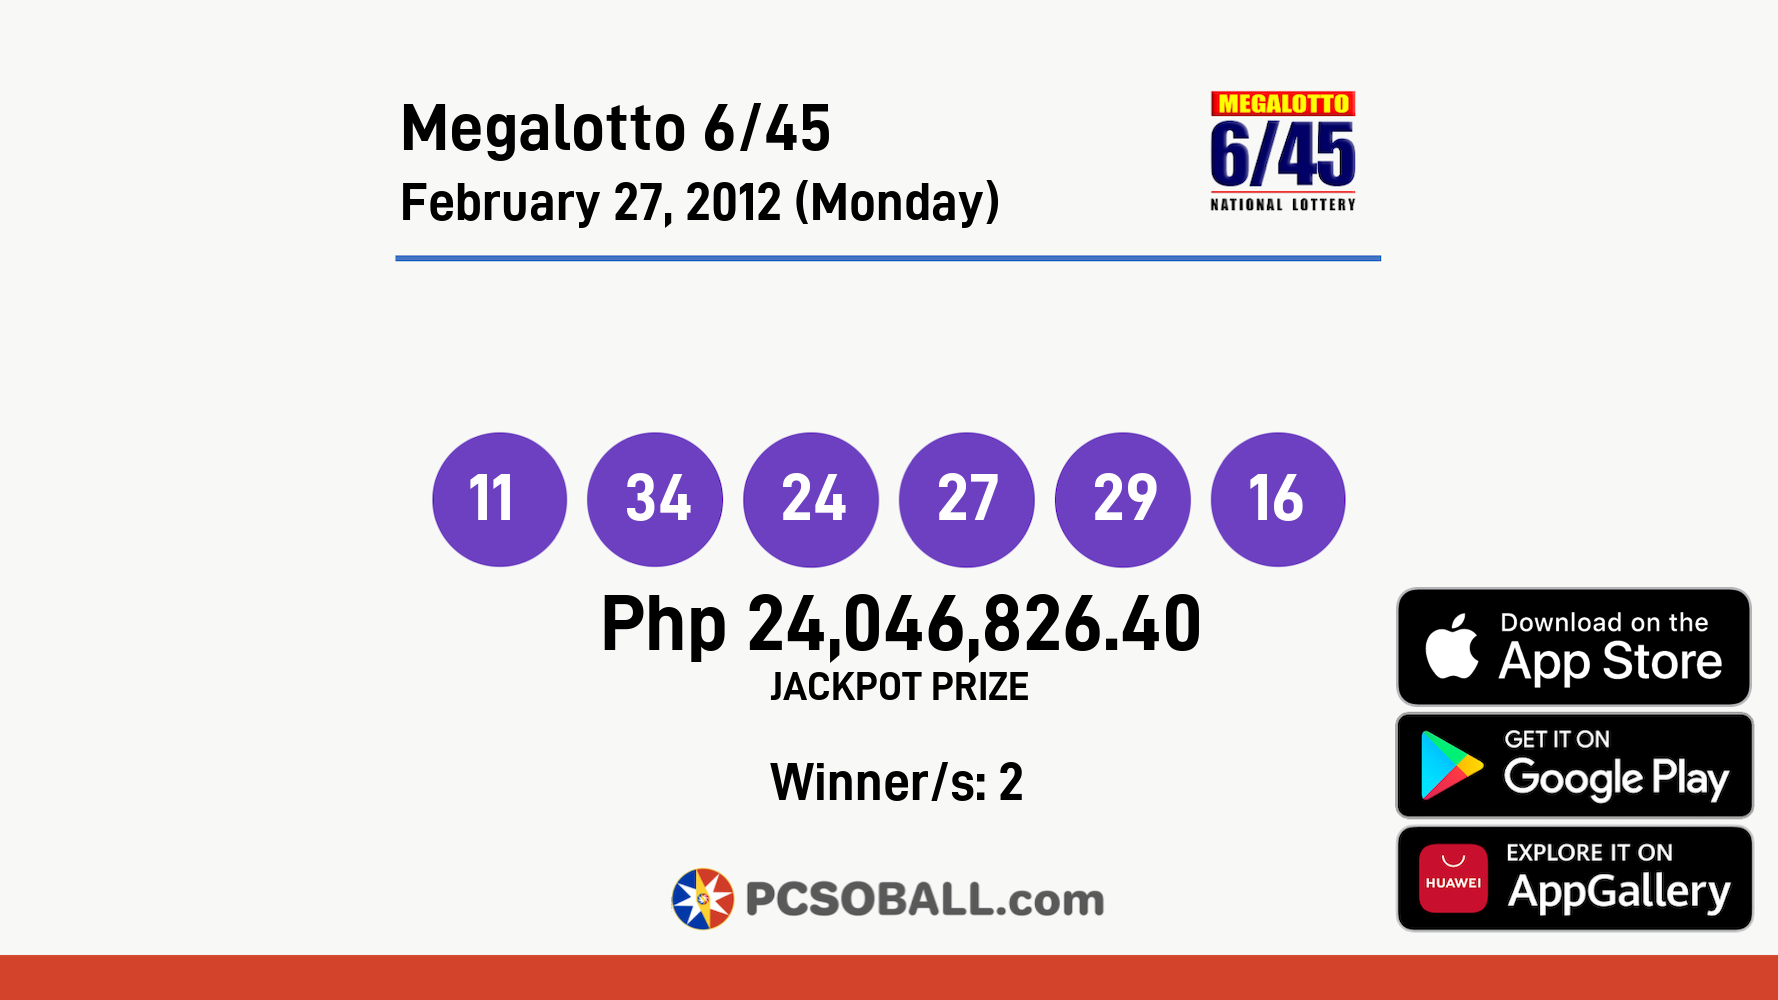 Megalotto 6/45 February 27, 2012 (Monday) Result